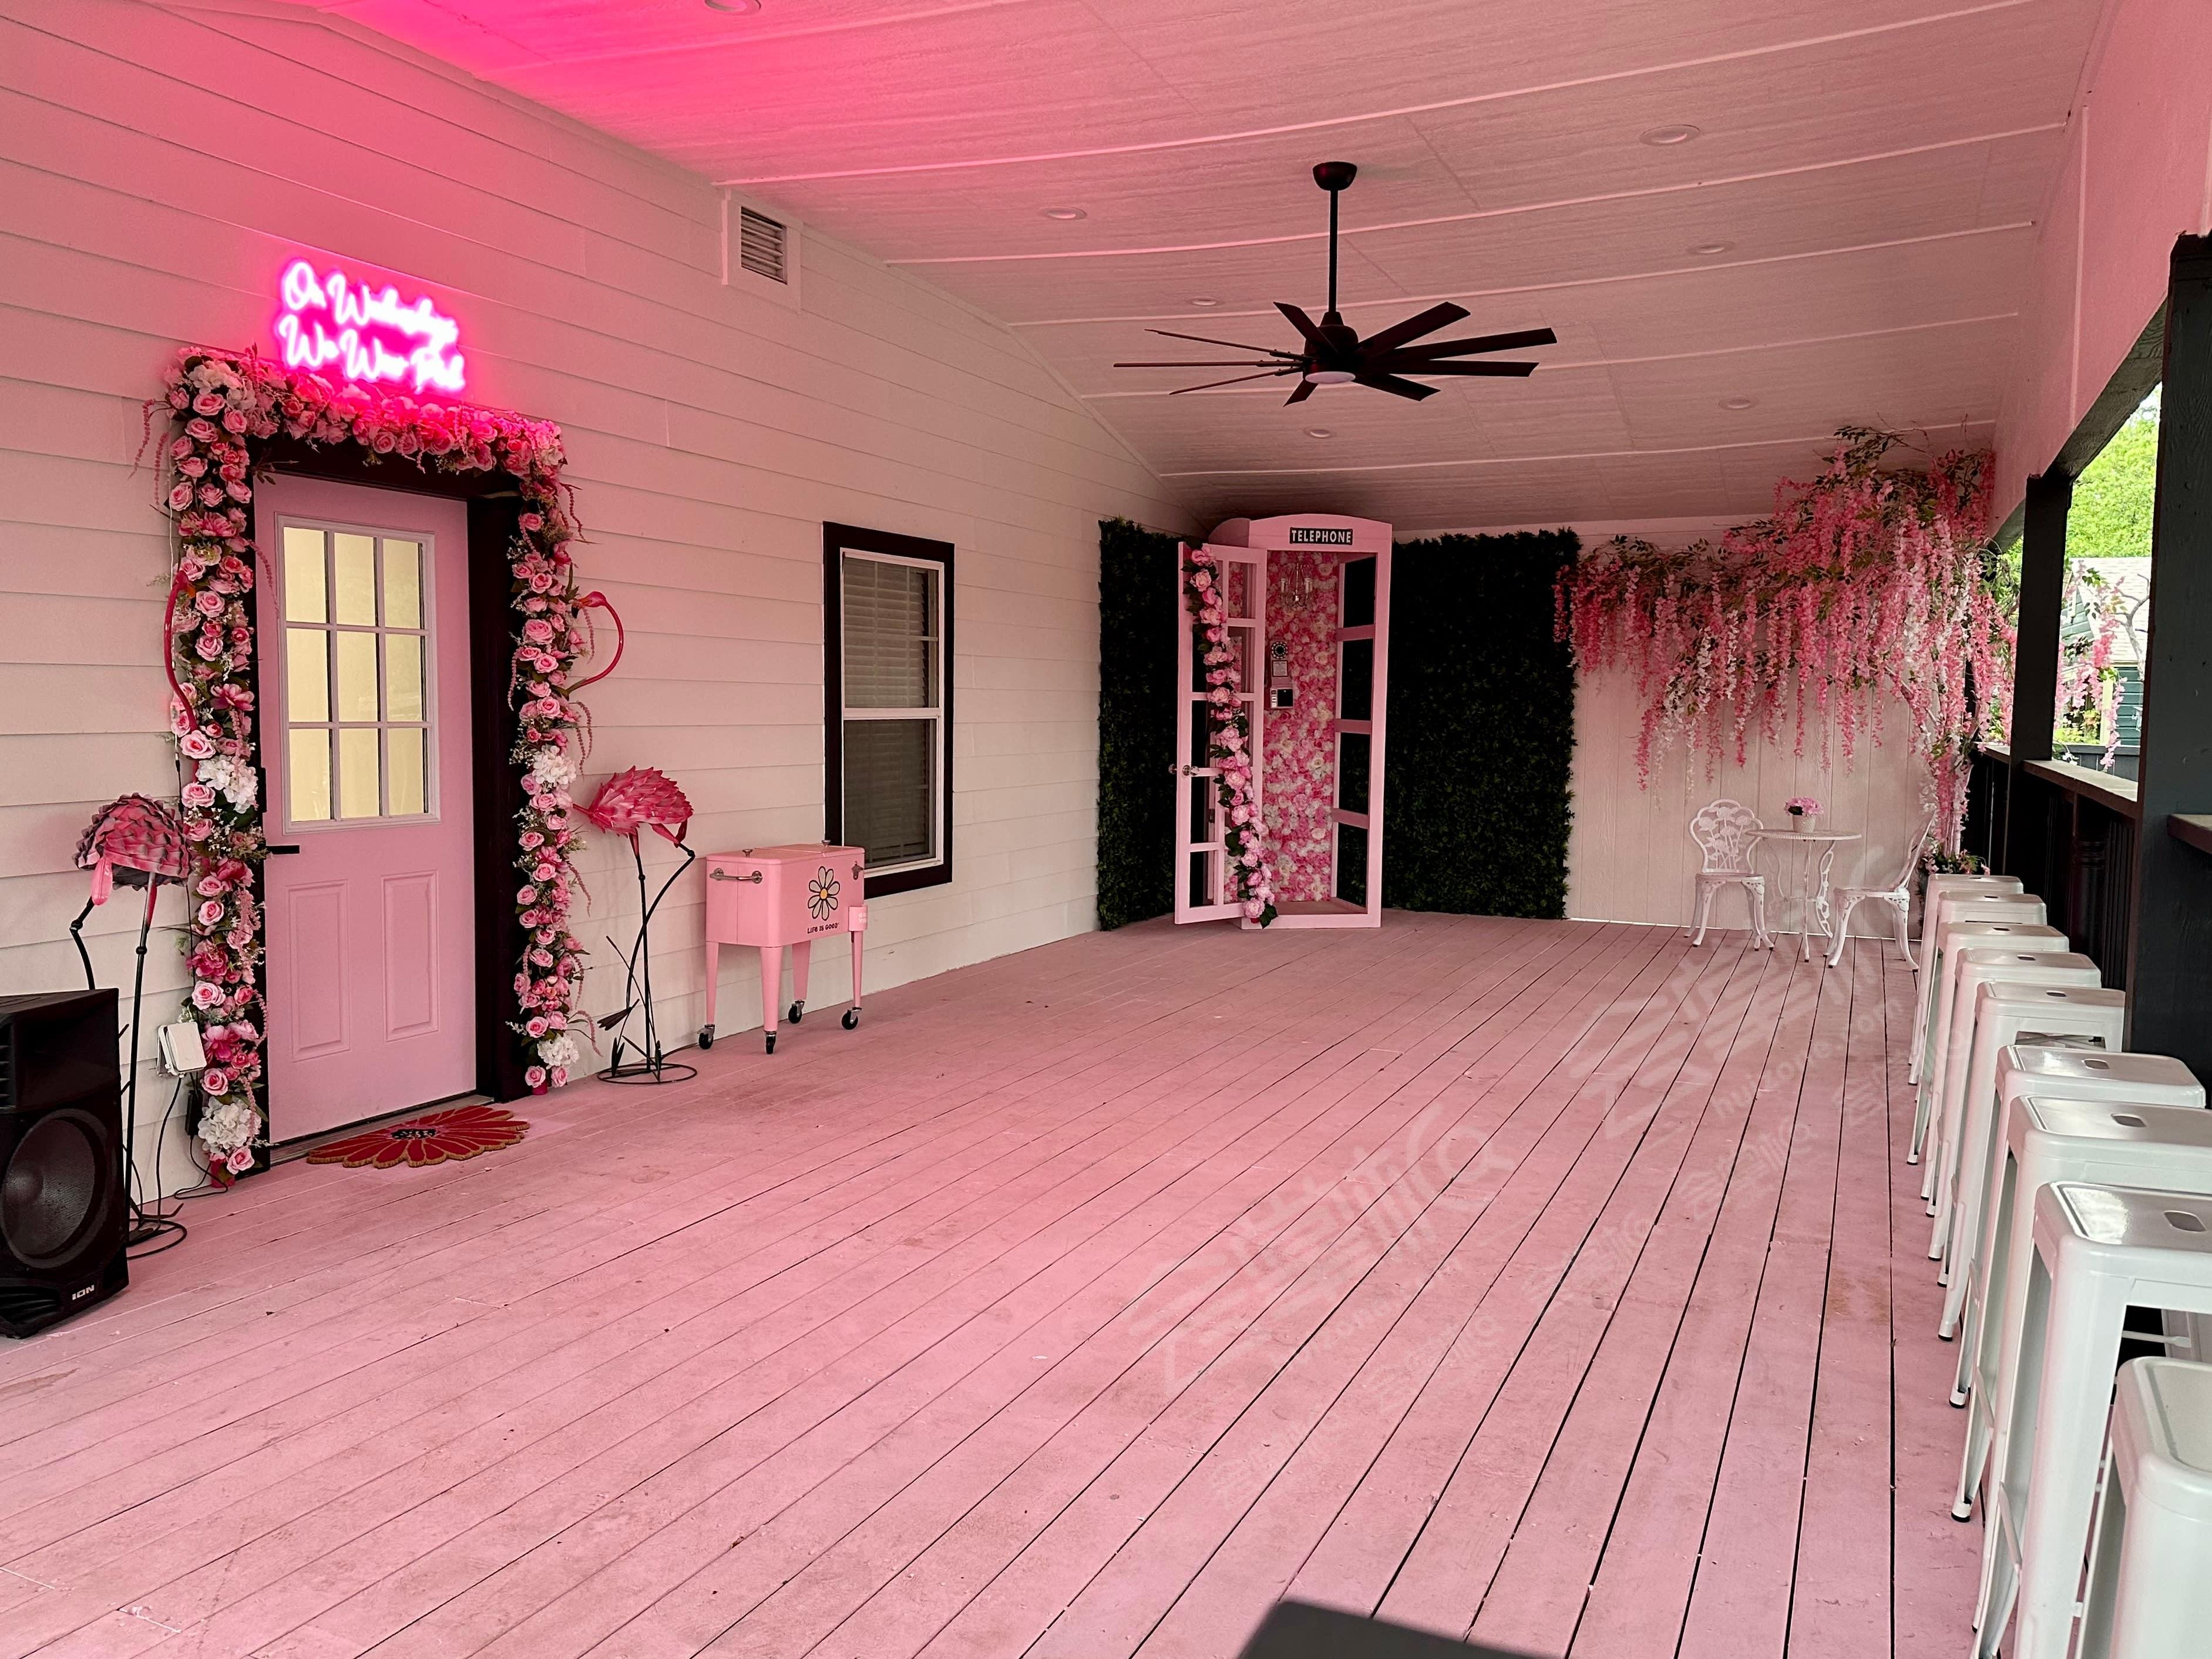 Pink Girly Home with so many Instagram Worthy Backgrounds